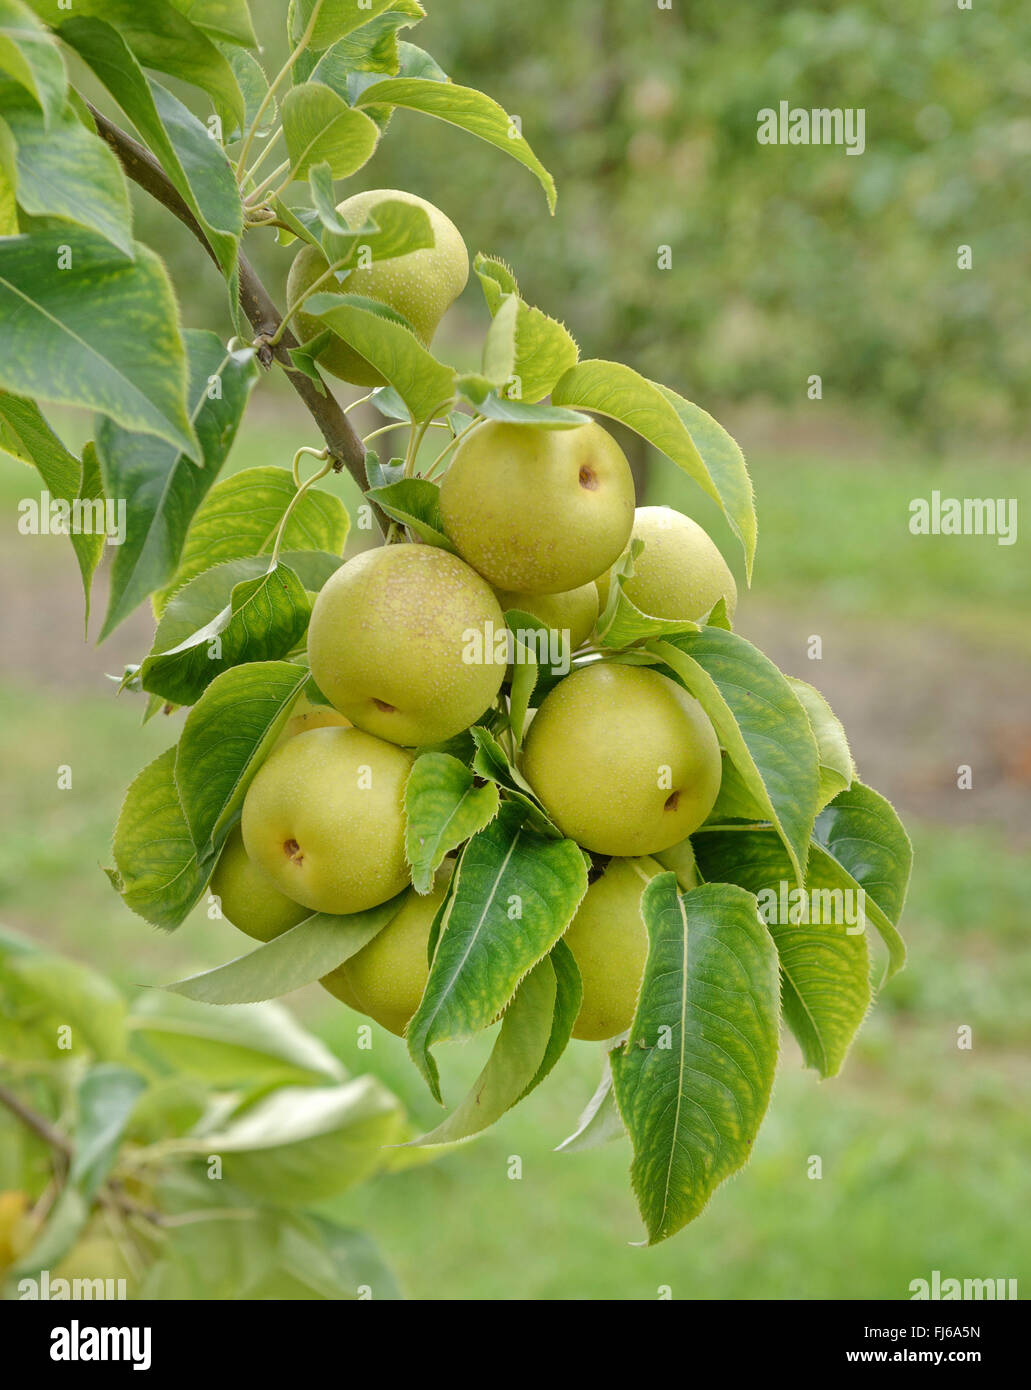 Asien pear (Pyrus pyrifolia 'An Ben Pear', Pyrus pyrifolia An Ben Pear), peras on a tree, cultivar An Ben Pear, Germany Stock Photo